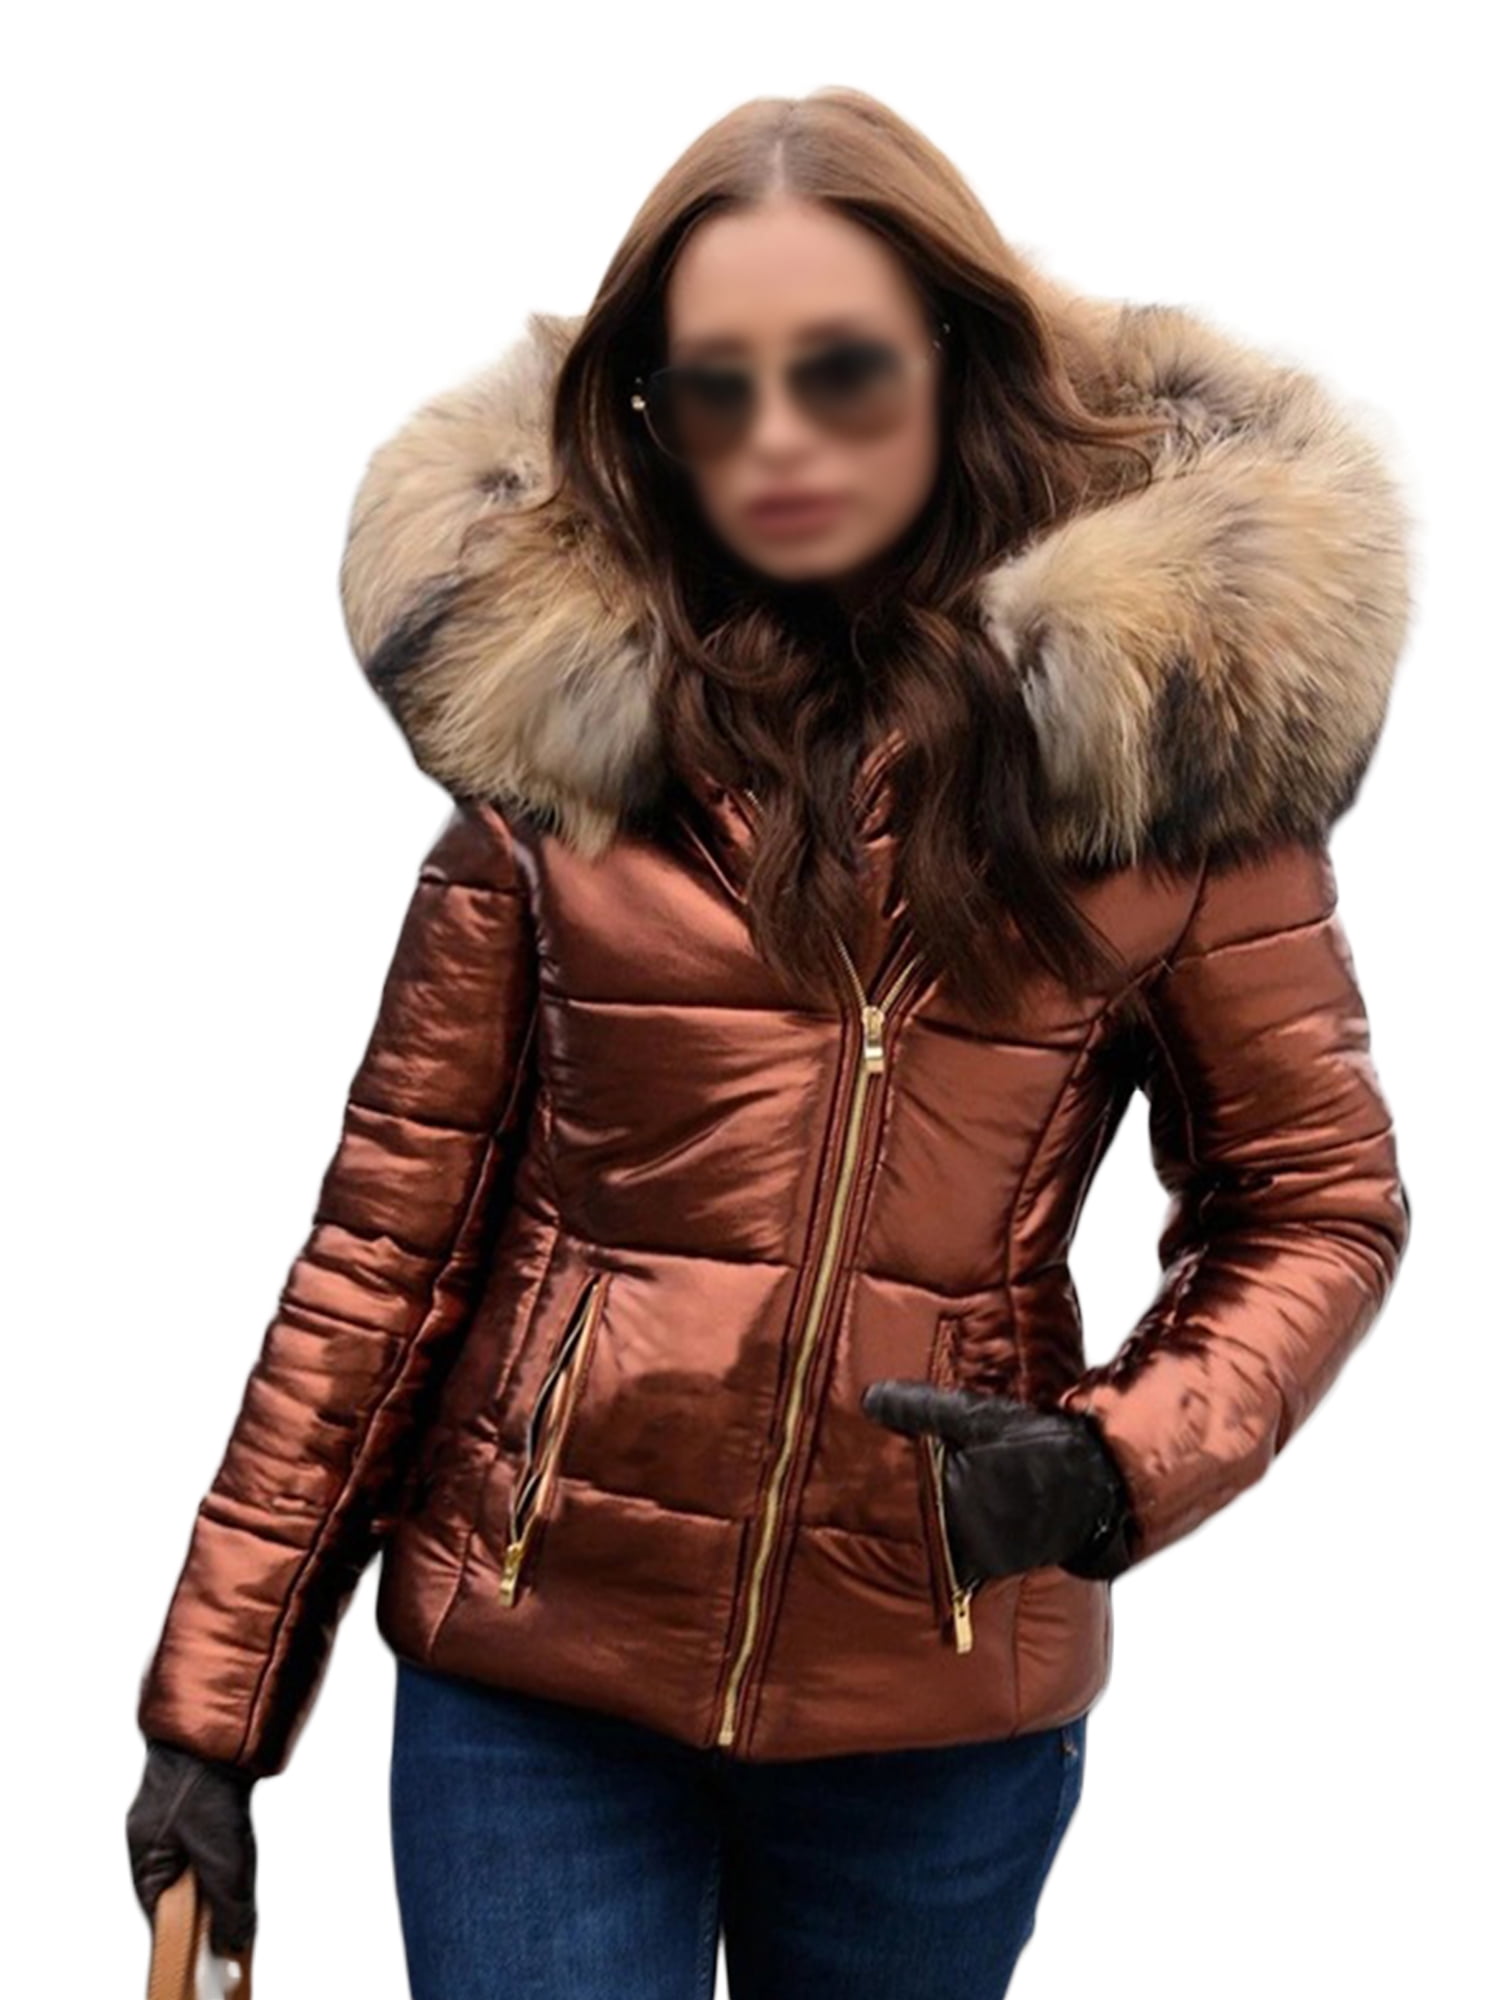 Roiii Women Casual Vintage Faux Fur Hooded Grey Warm Thick Ladies Jacket Coat Size S-3XL 